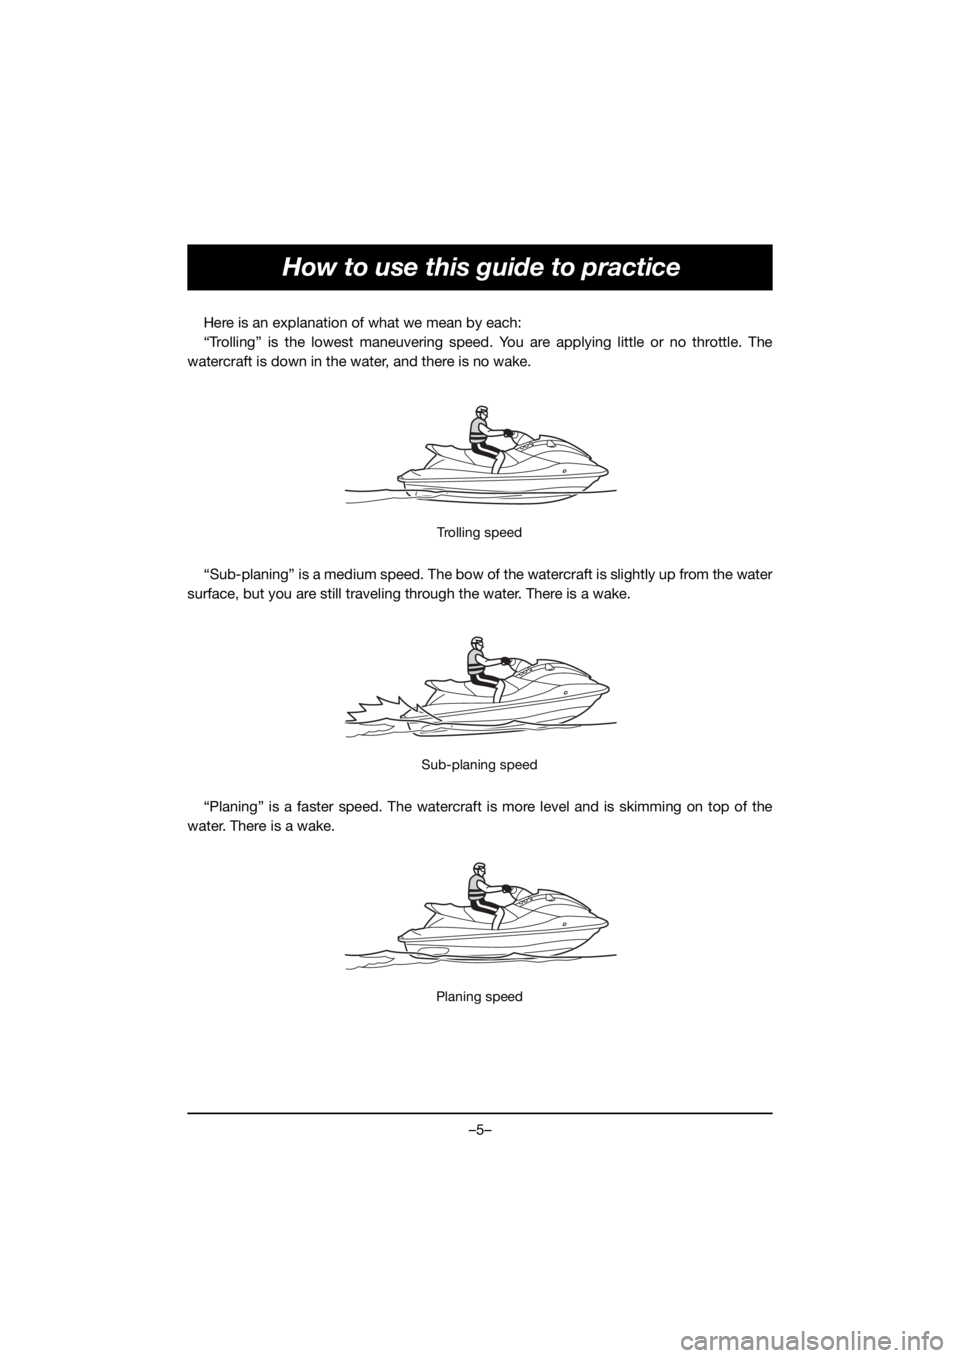 YAMAHA VX CRUISER HO 2020  Manuale de Empleo (in Spanish) –5–
How to use this guide to practice
Here is an explanation of what we mean by each:
“Trolling” is the lowest maneuvering speed. You are applying little or no throttle. The
watercraft is down